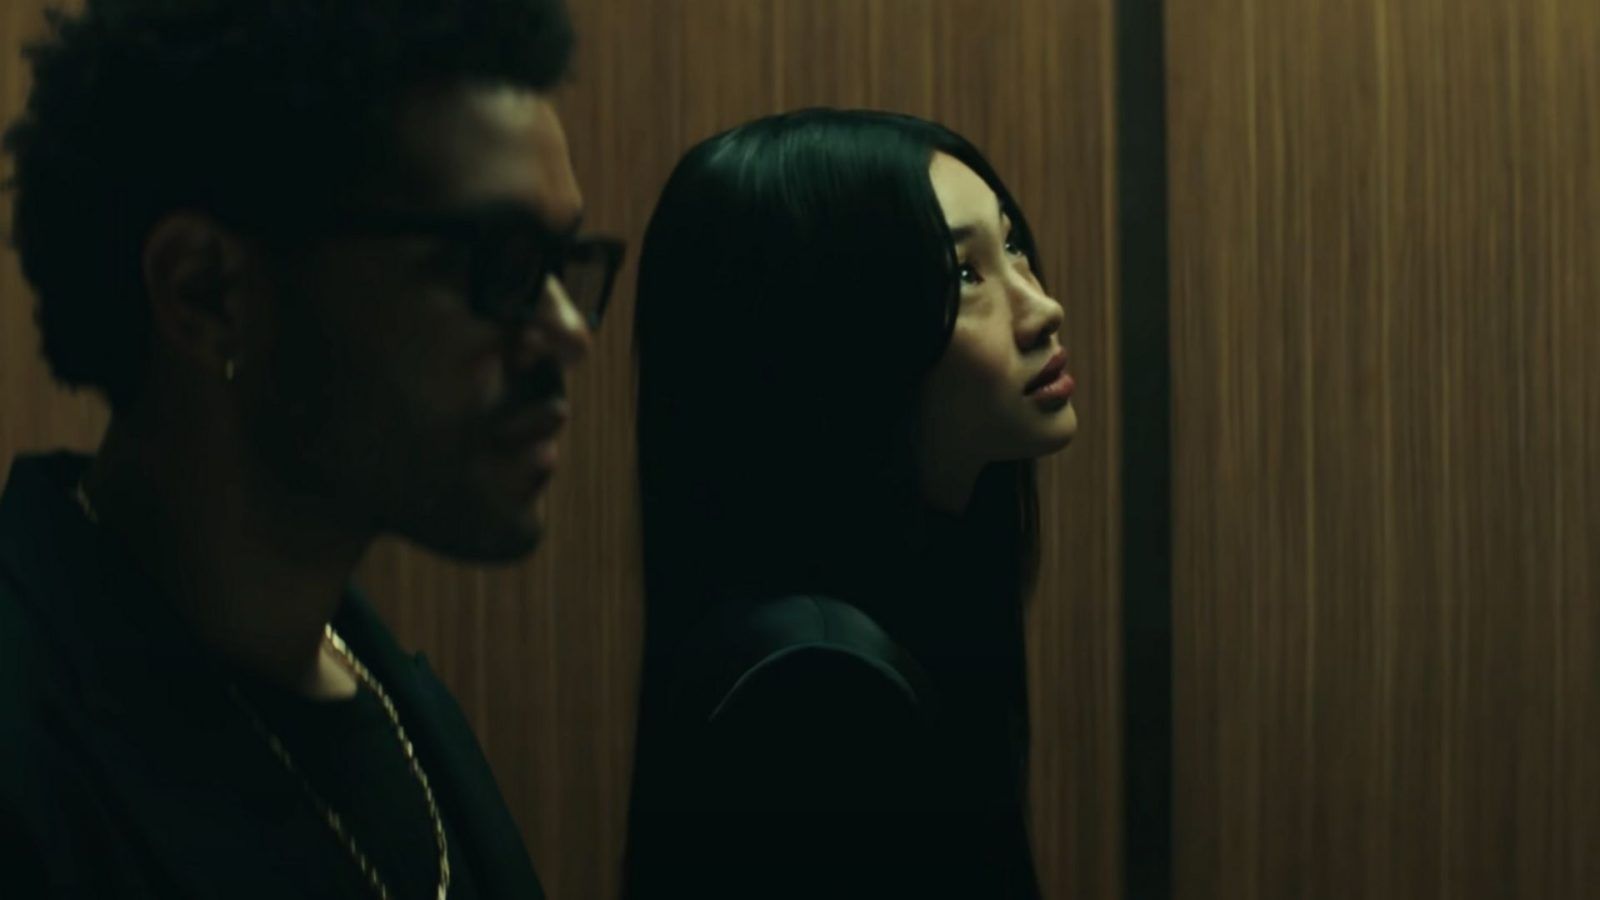 Watch Now: HoYeon Jung’s music video debut with The Weeknd in “Out of Time”